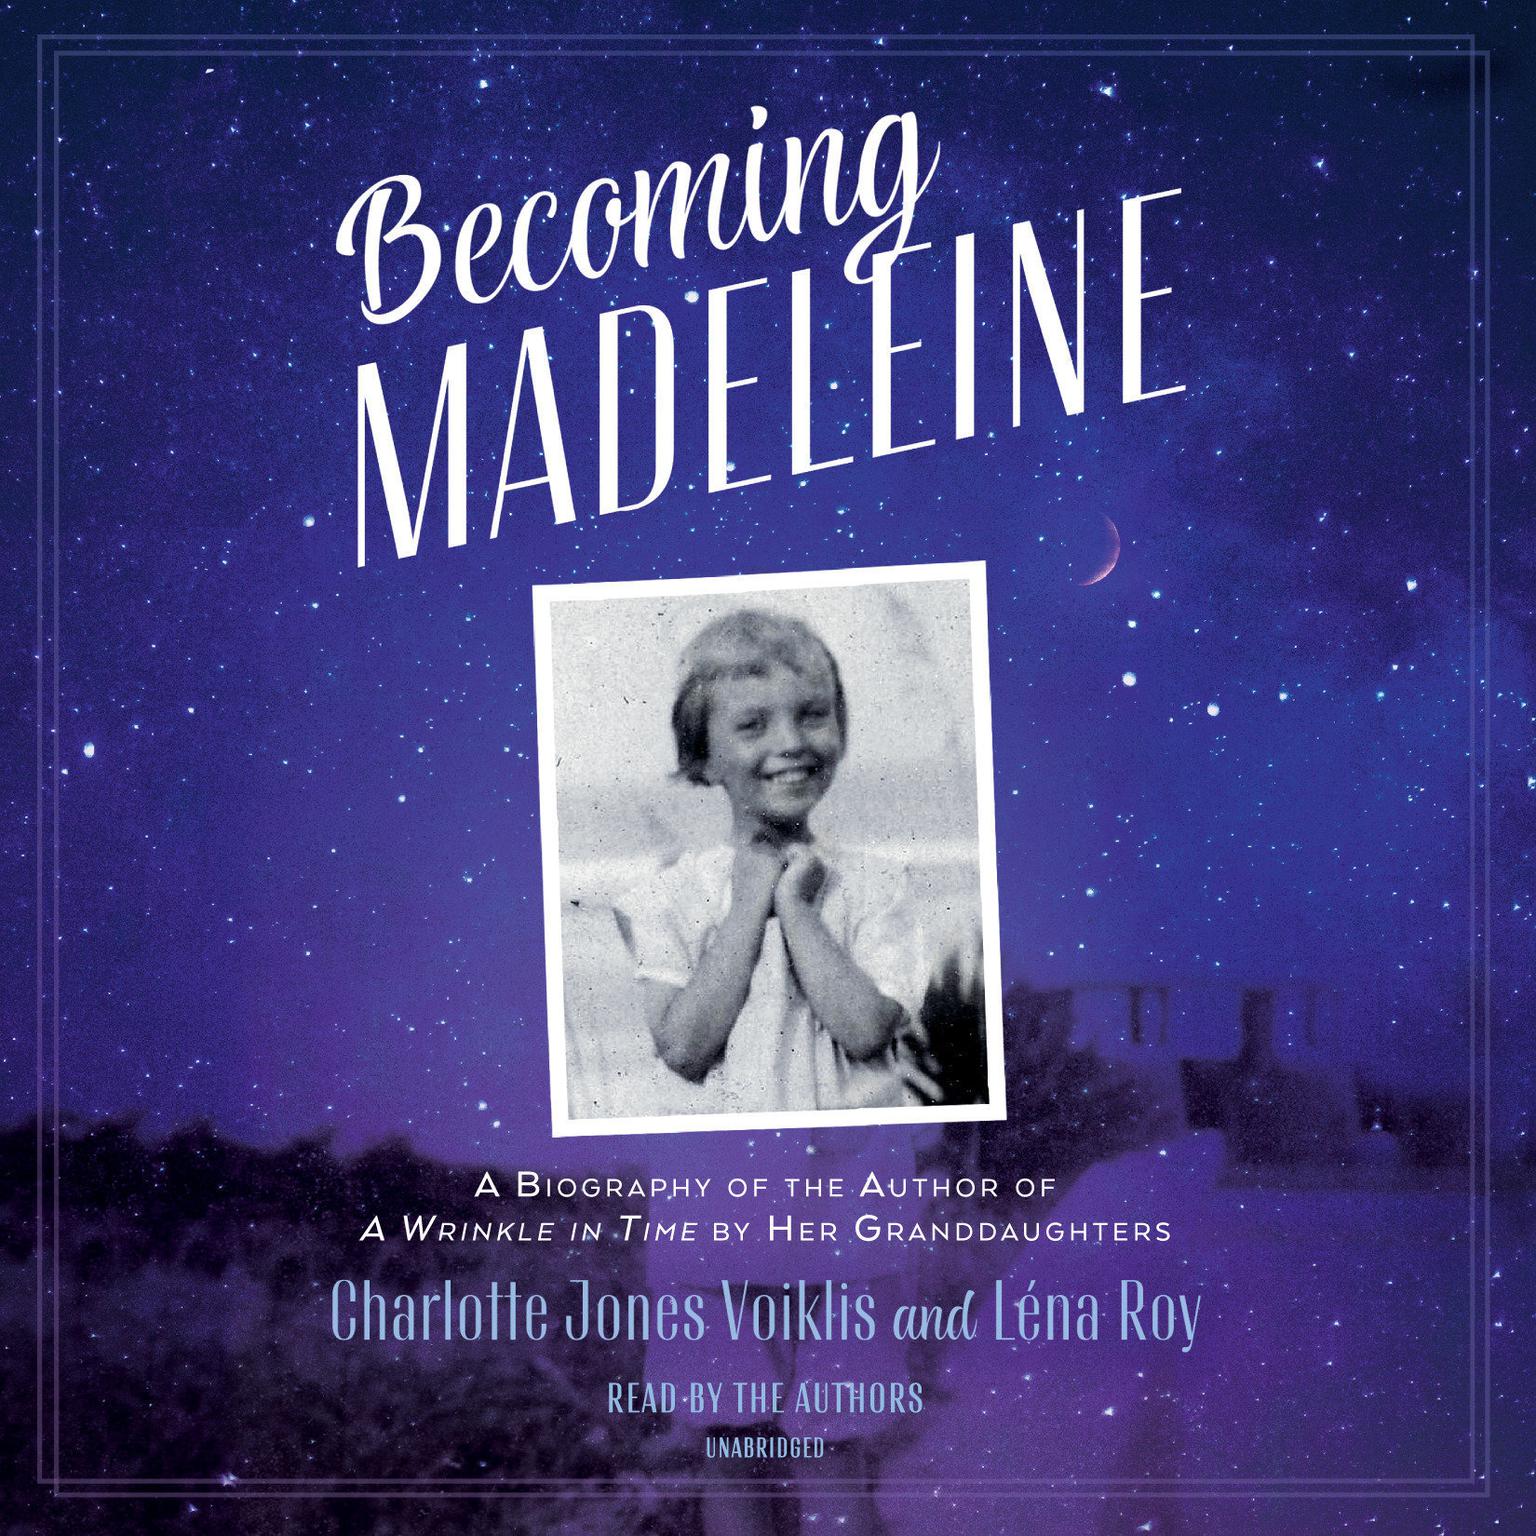 Becoming Madeleine: A Biography of the Author of A Wrinkle in Time by Her Granddaughters Audiobook, by Léna Roy